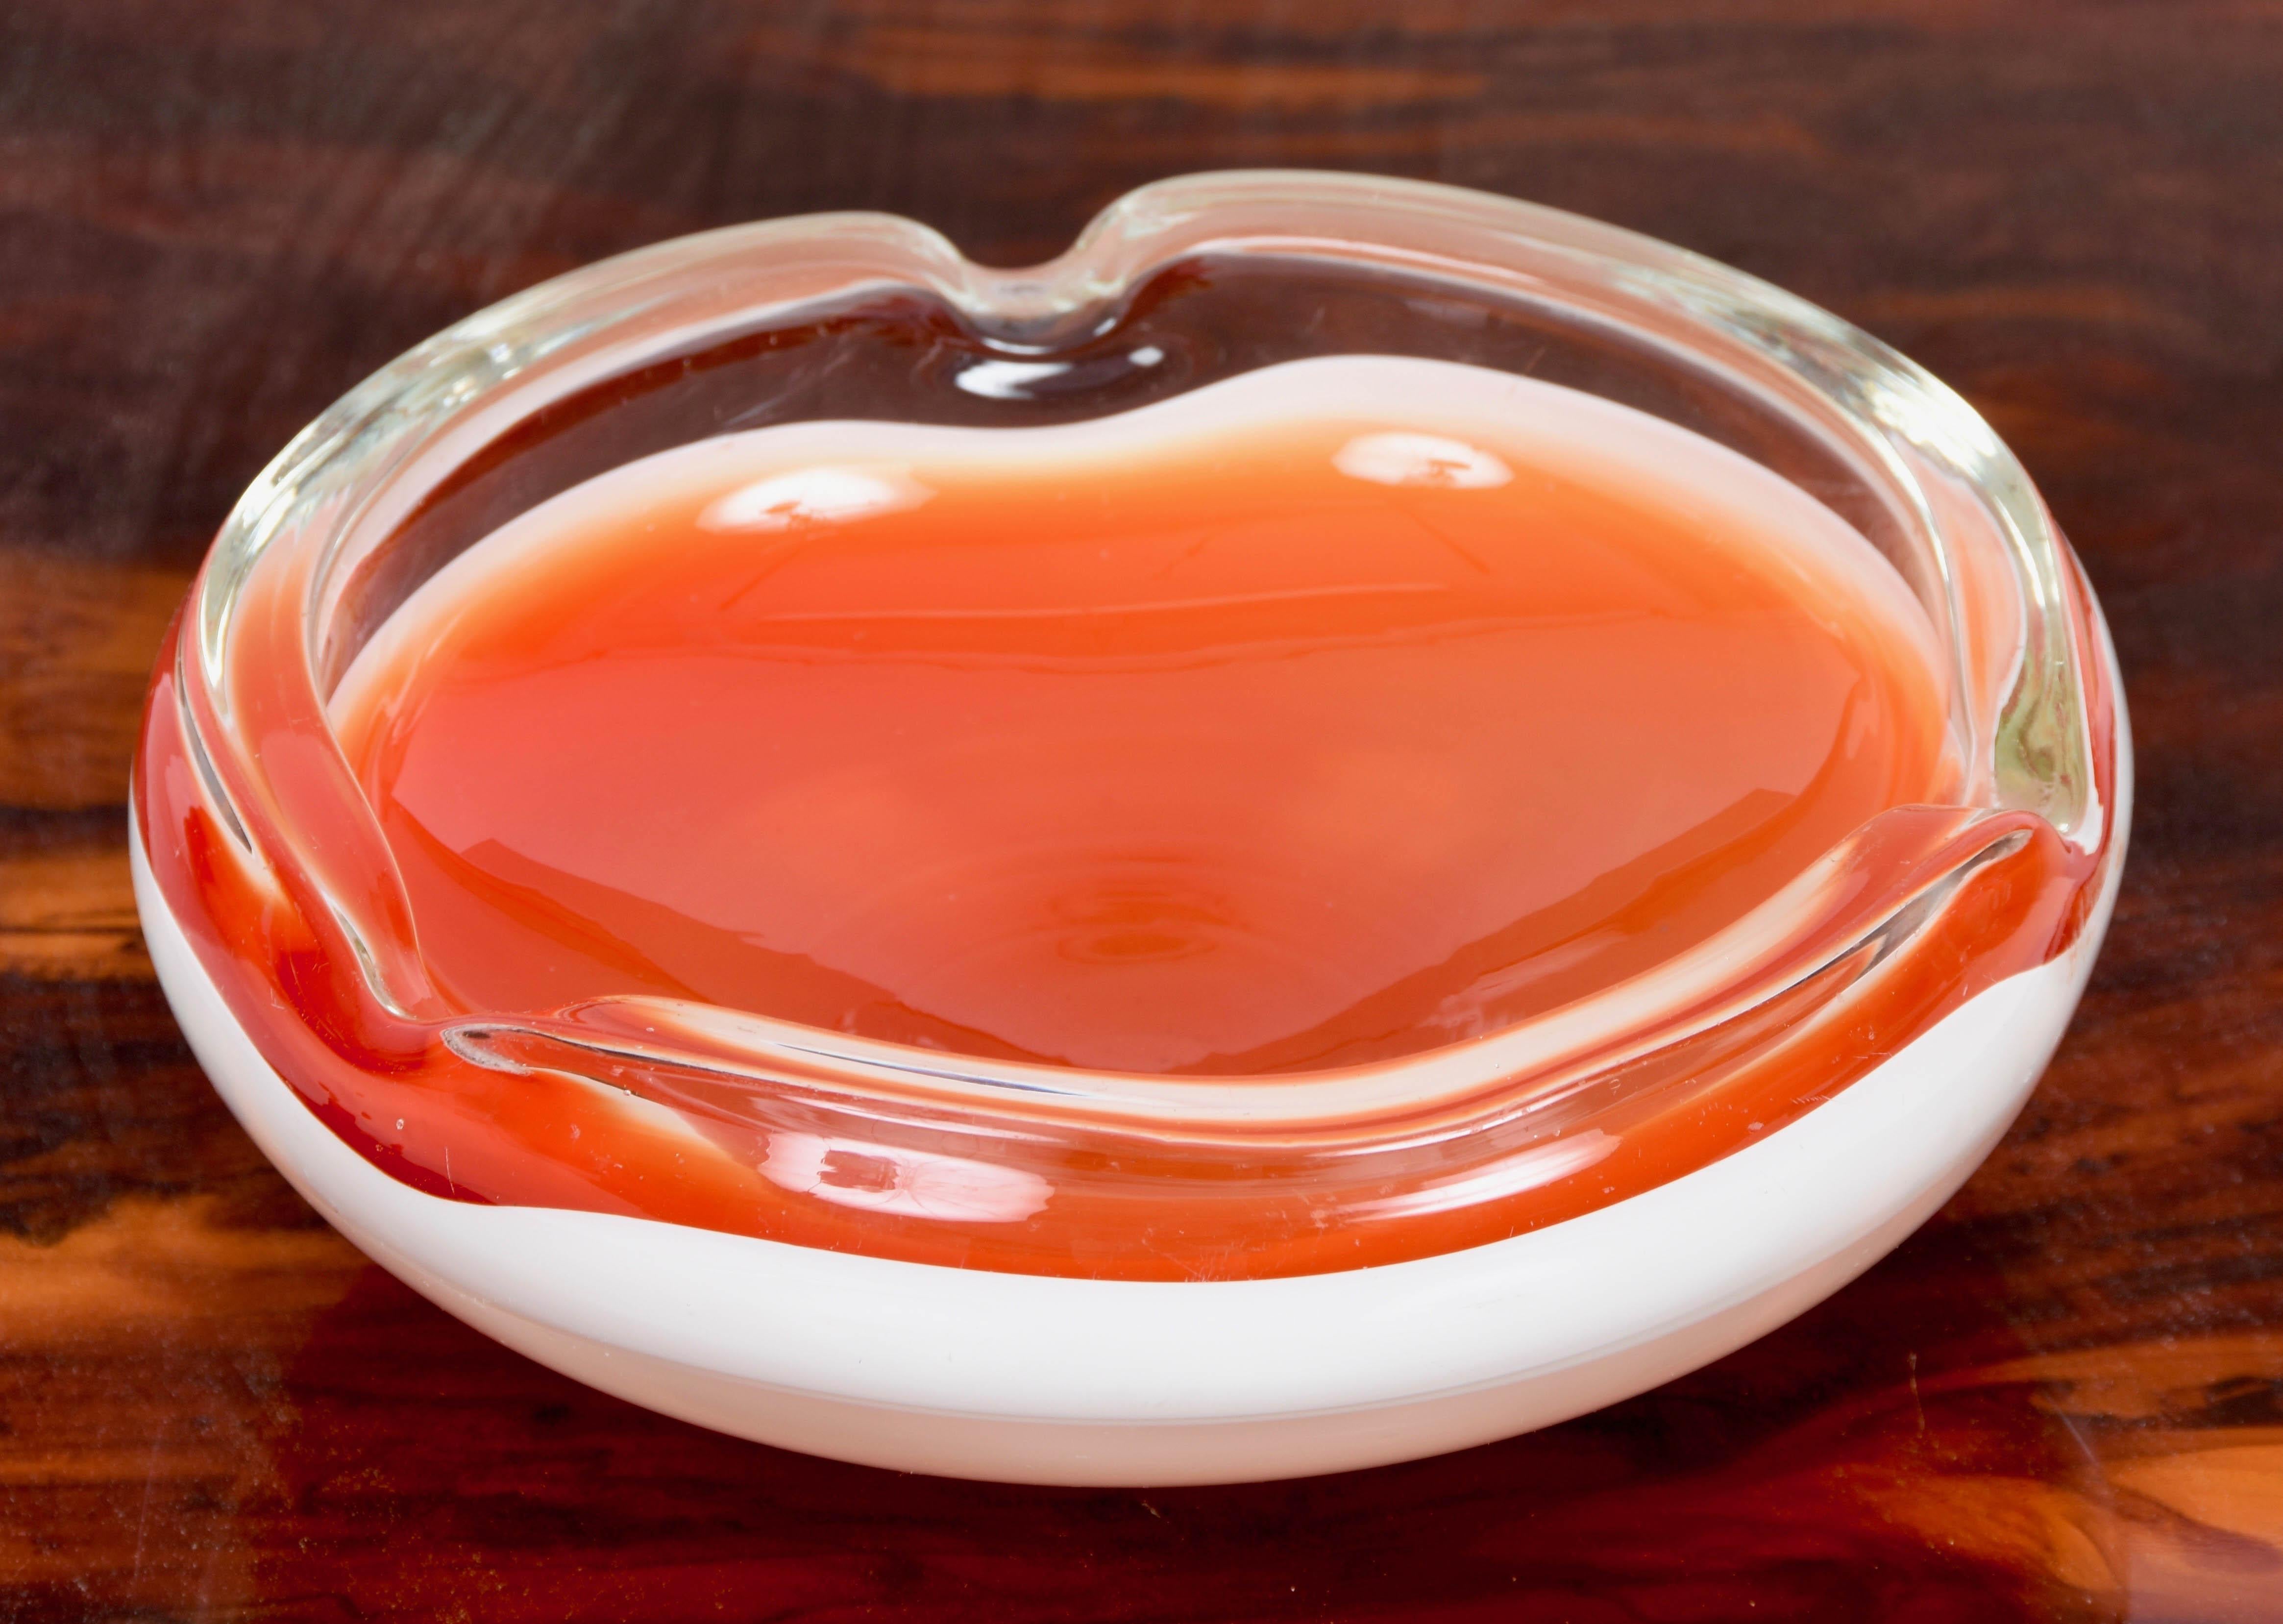 Fantastic midcentury orange and white Murano glass bowl or ashtray. This fantastic piece was designed in Italy during the 1960s.

This piece has a combination of colors, orange and white, that is typical of the 1960s and soft and rounded lines,